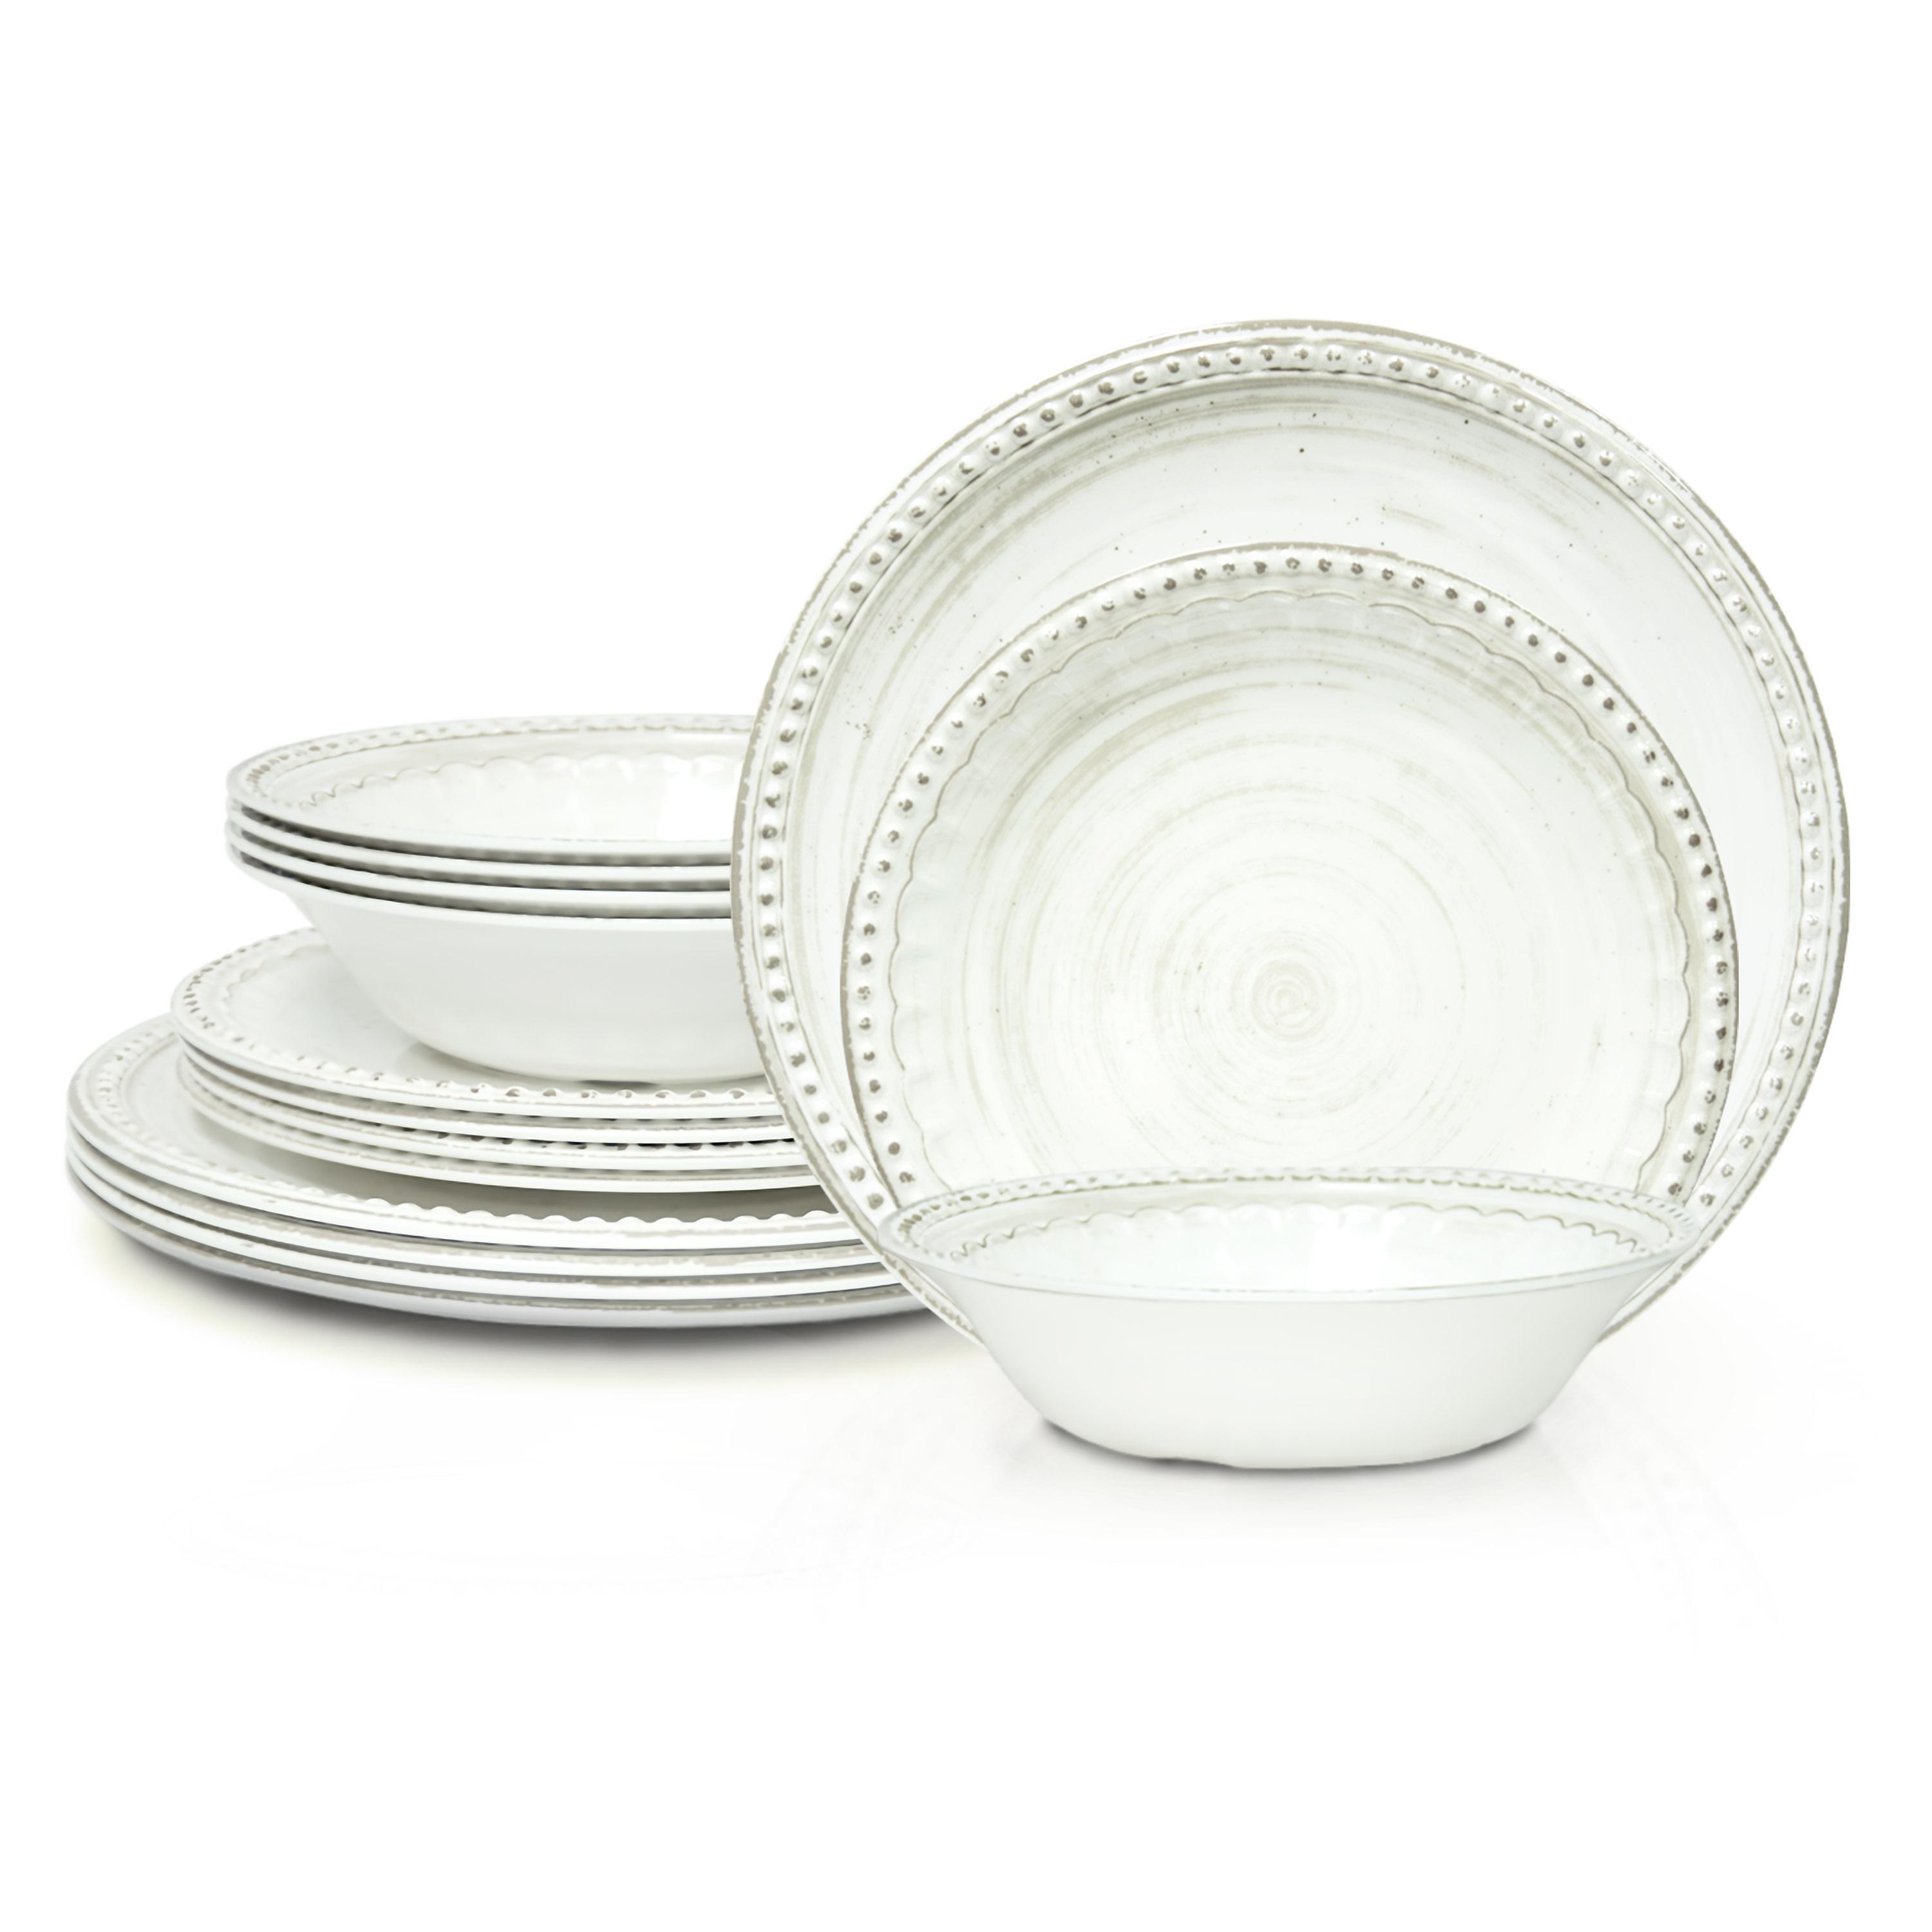 French Country Plate & Bowl Sets, White, 12-piece set slideshow image 1